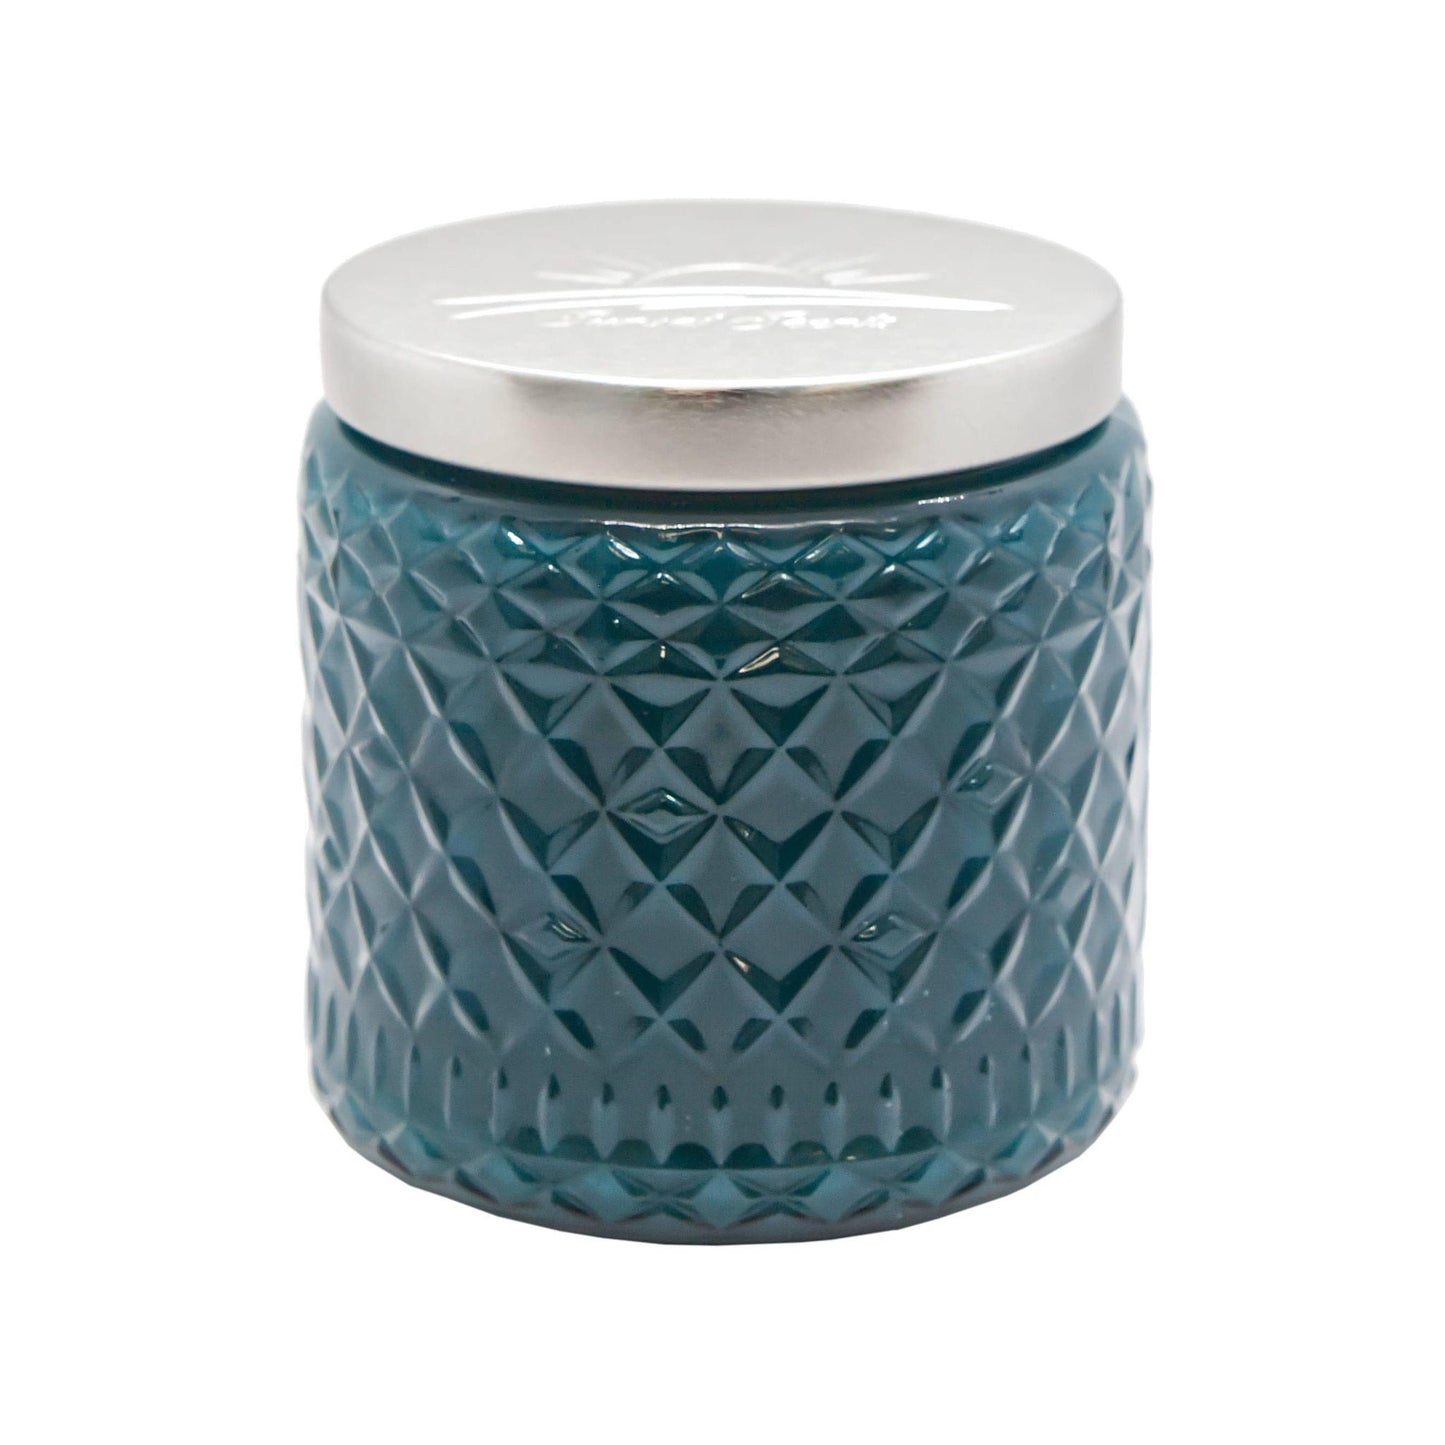 Caribbean Sky Scented Candle